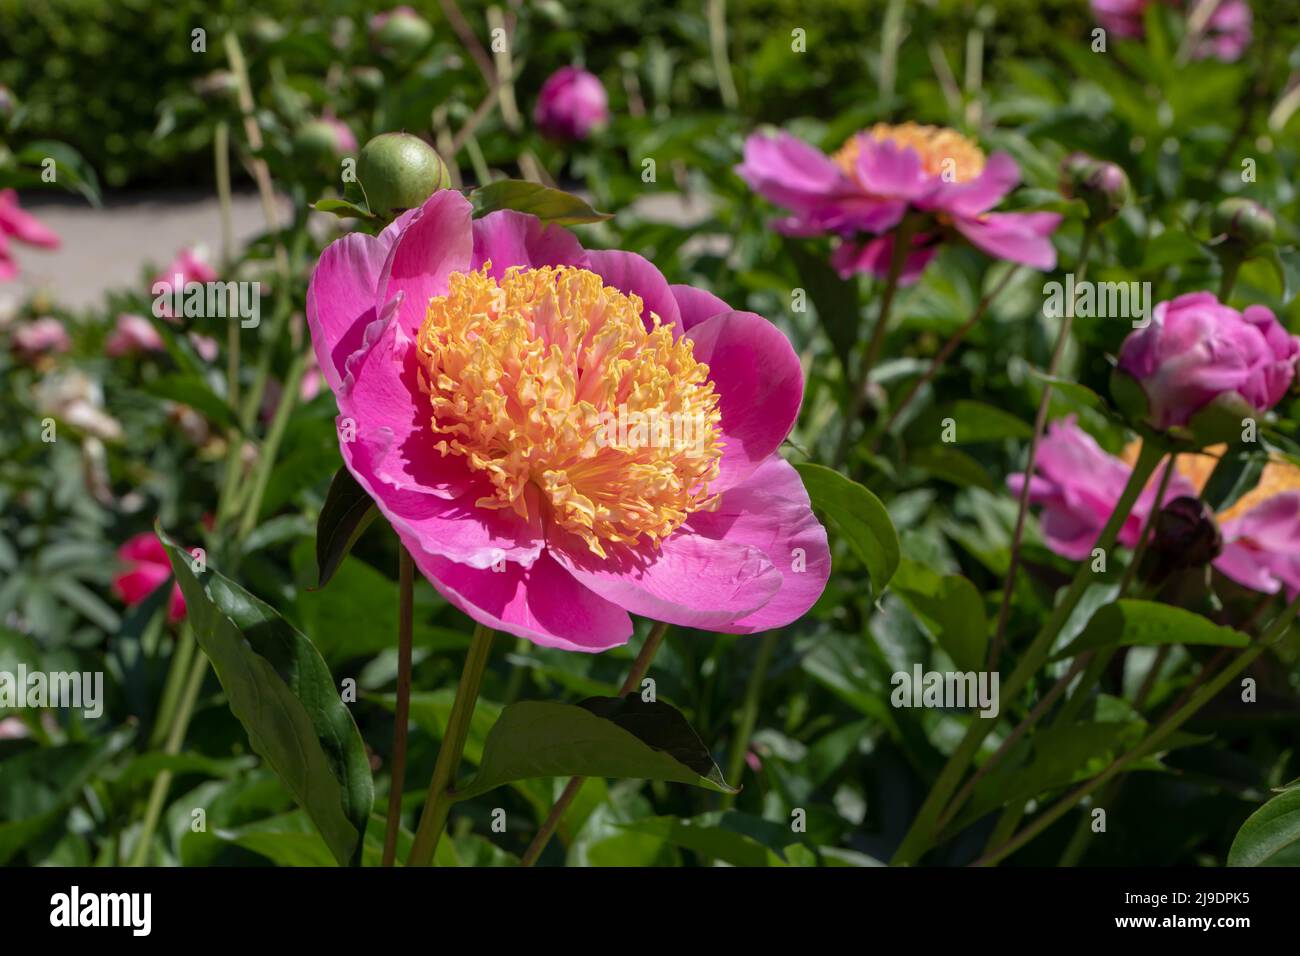 Herbaceous peony bright pink japanese type flowers with yellow center and green lush foliage Stock Photo